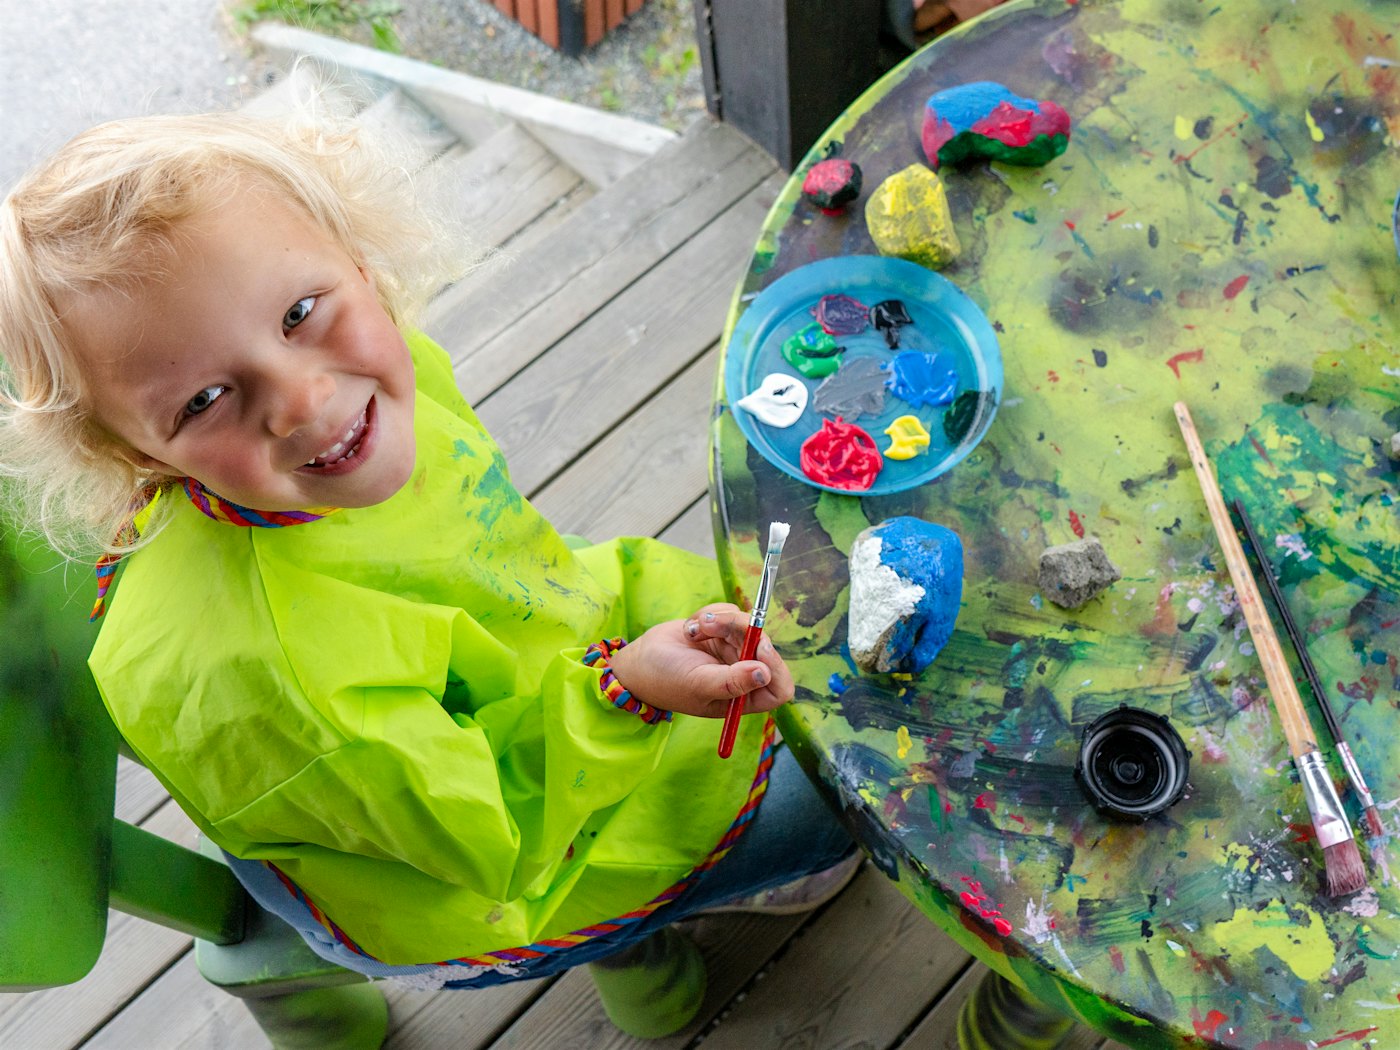 A child with a painting bib smiles and paints on a stone. Photo